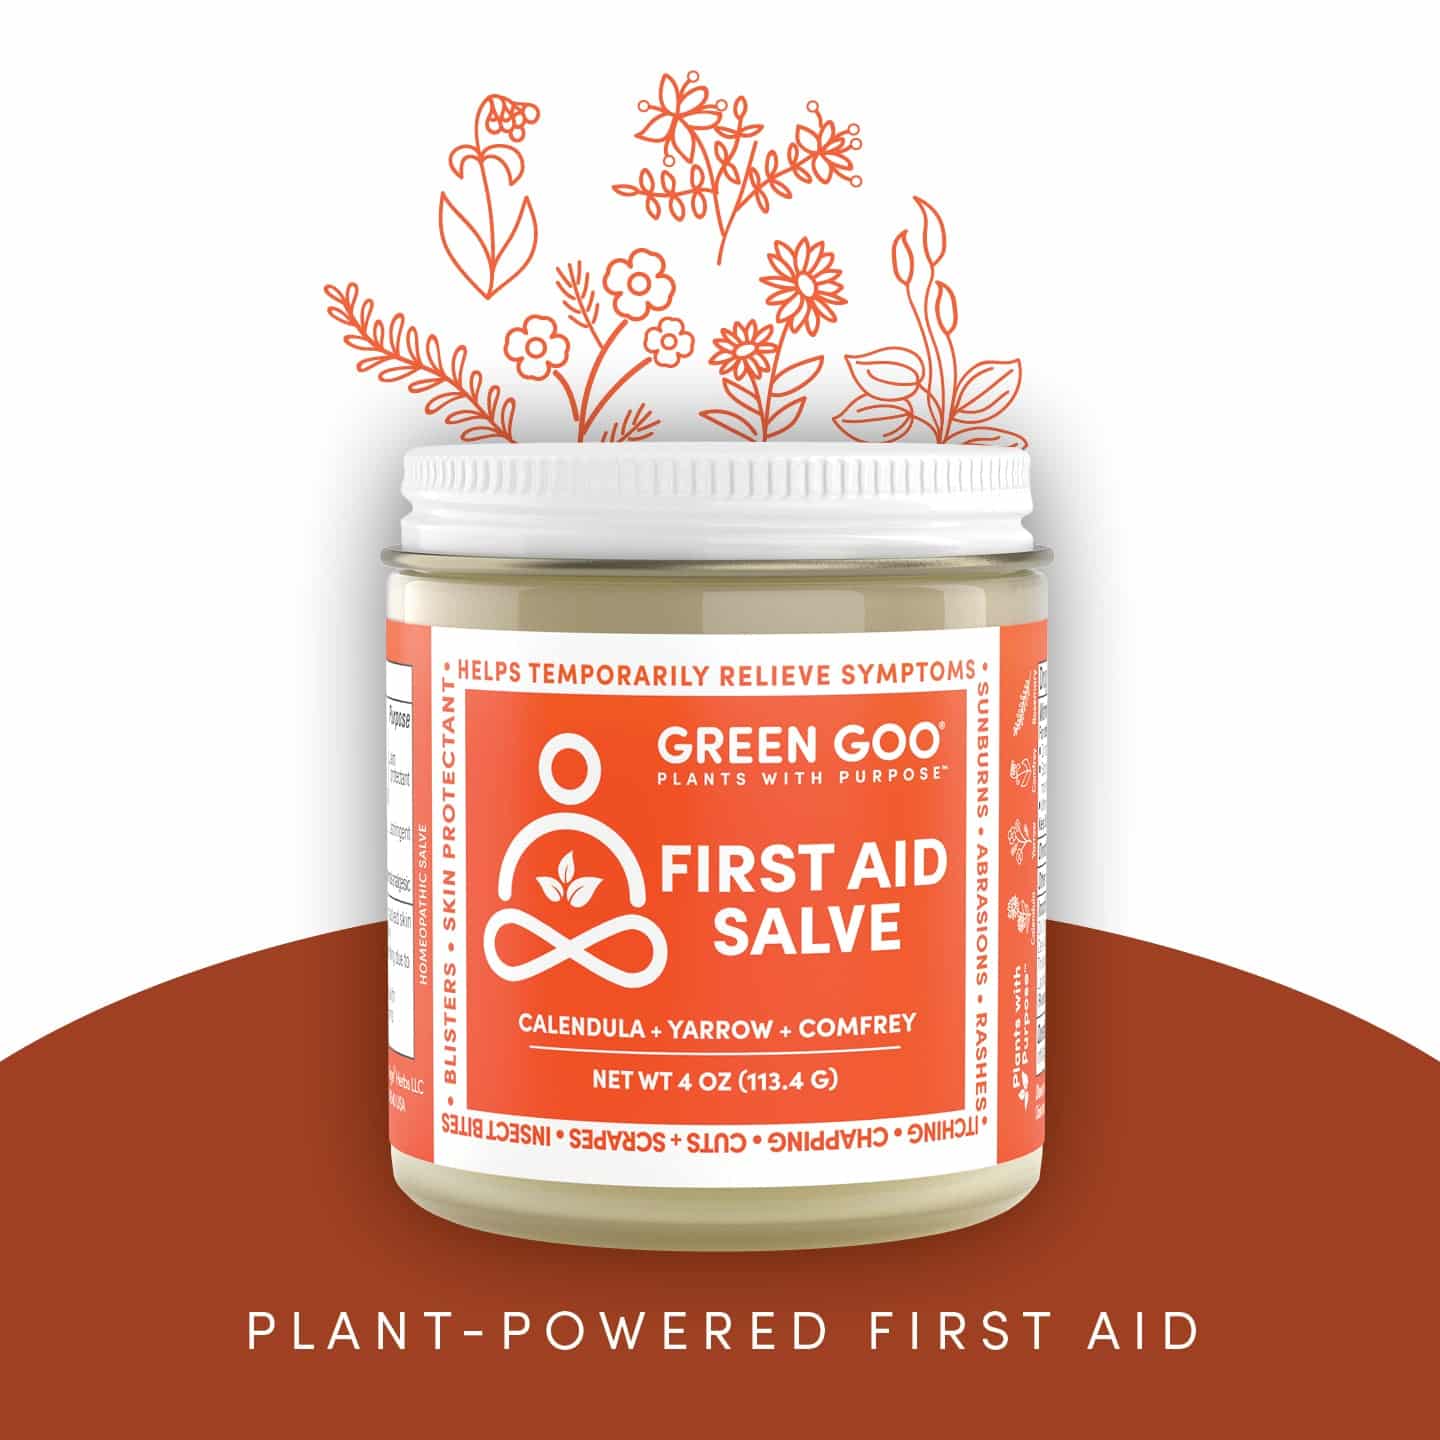 Natural First Aid Balm from Green Goo